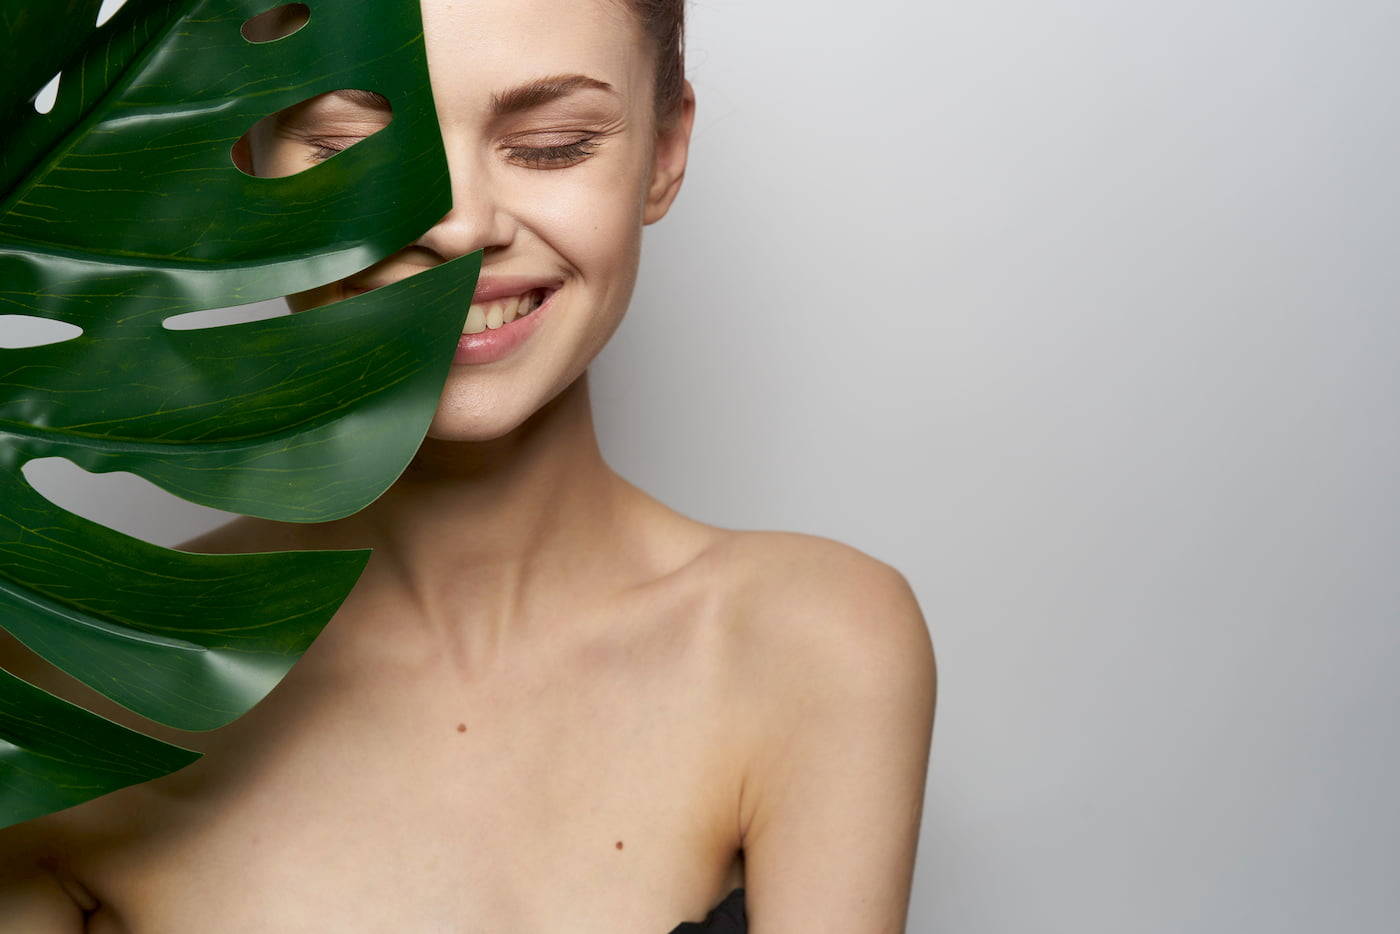 Four secrets to get fresh, glowing skin naturally